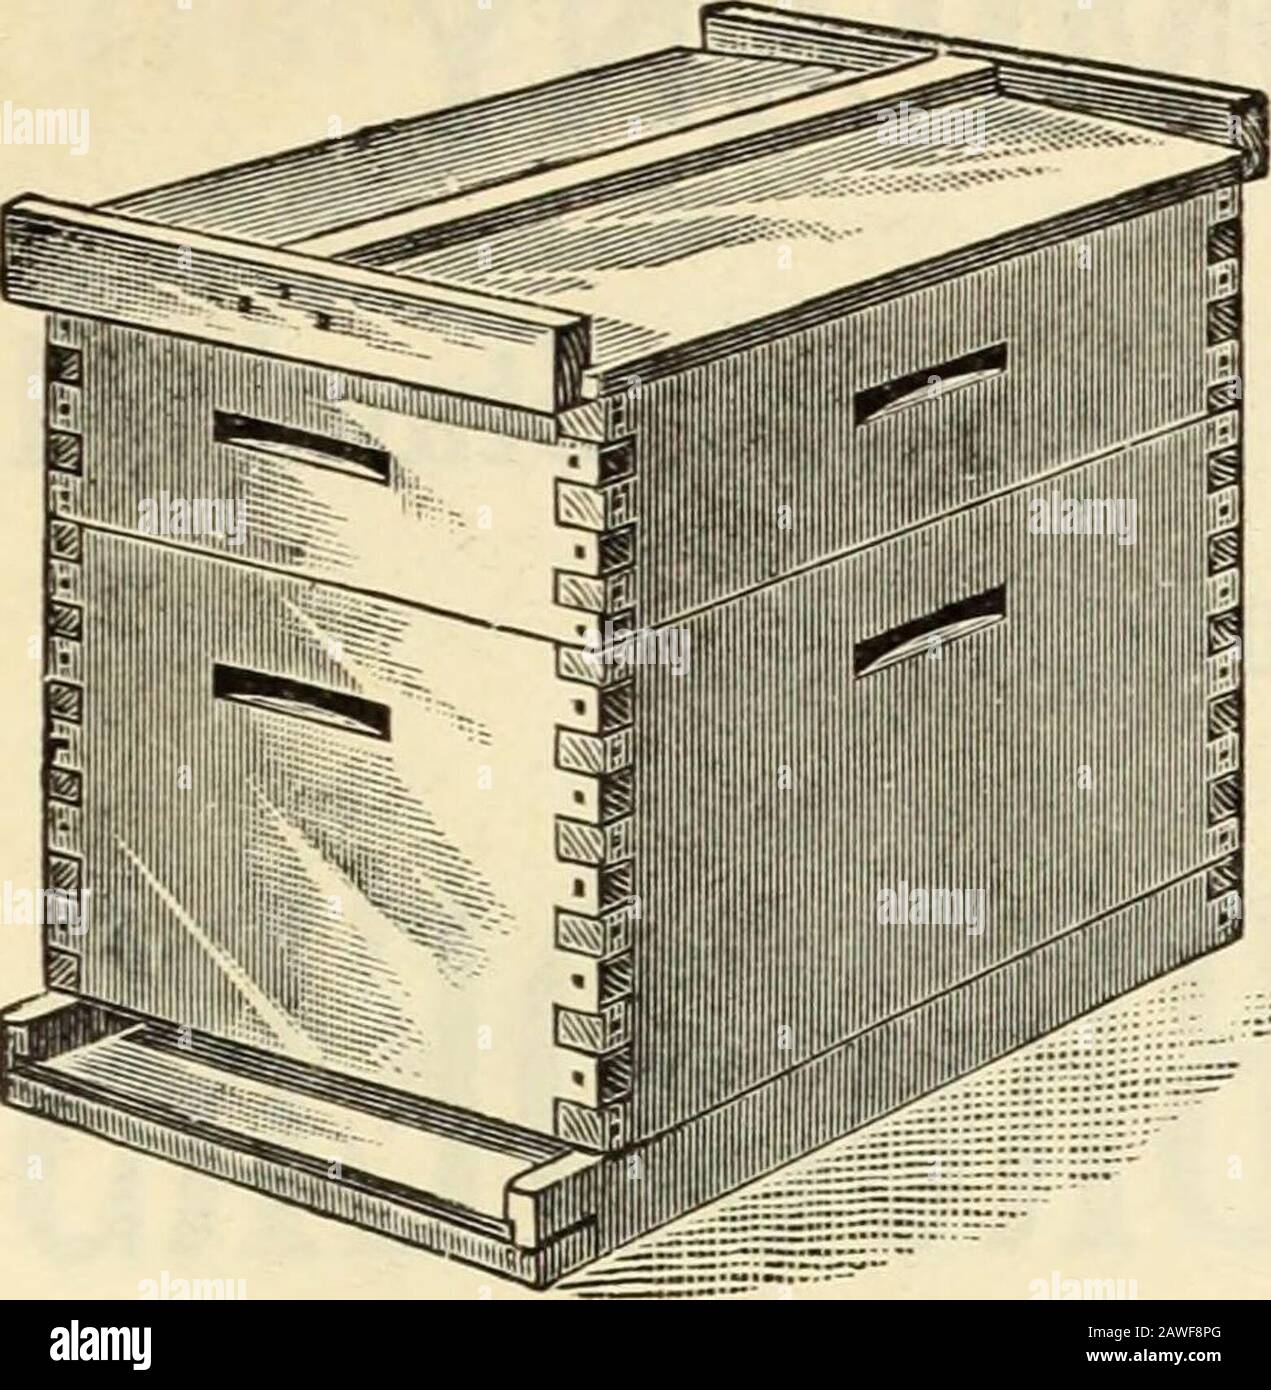 Johnson's garden & farm manual : 1910 . BEE AND DAIRY SUPPLIES 87 BEE HIVES. tailed together, as shown in cut,gives it its name. Eachset up. No. 1. Dovetailed Hives, eight frame, all partscomplete $3 15 No. 2. Dovetailed Hives,ten frame, all partscomplete 3 60 No. 5. Dovetailed Hives,eight frame, all partscomplete 3 40 The Dove-tailed Hive is taking the leadof the single-walled hives,as it containsmany of themost desirablefeatures of thevarious hivesfor rapi(4 hand-ling of bees,and is one ofthe cheapesthives manu-factured. It is dove-and that is what Eachin flat. Per 5in flat. $2 35 $10 75 3 0 Stock Photo